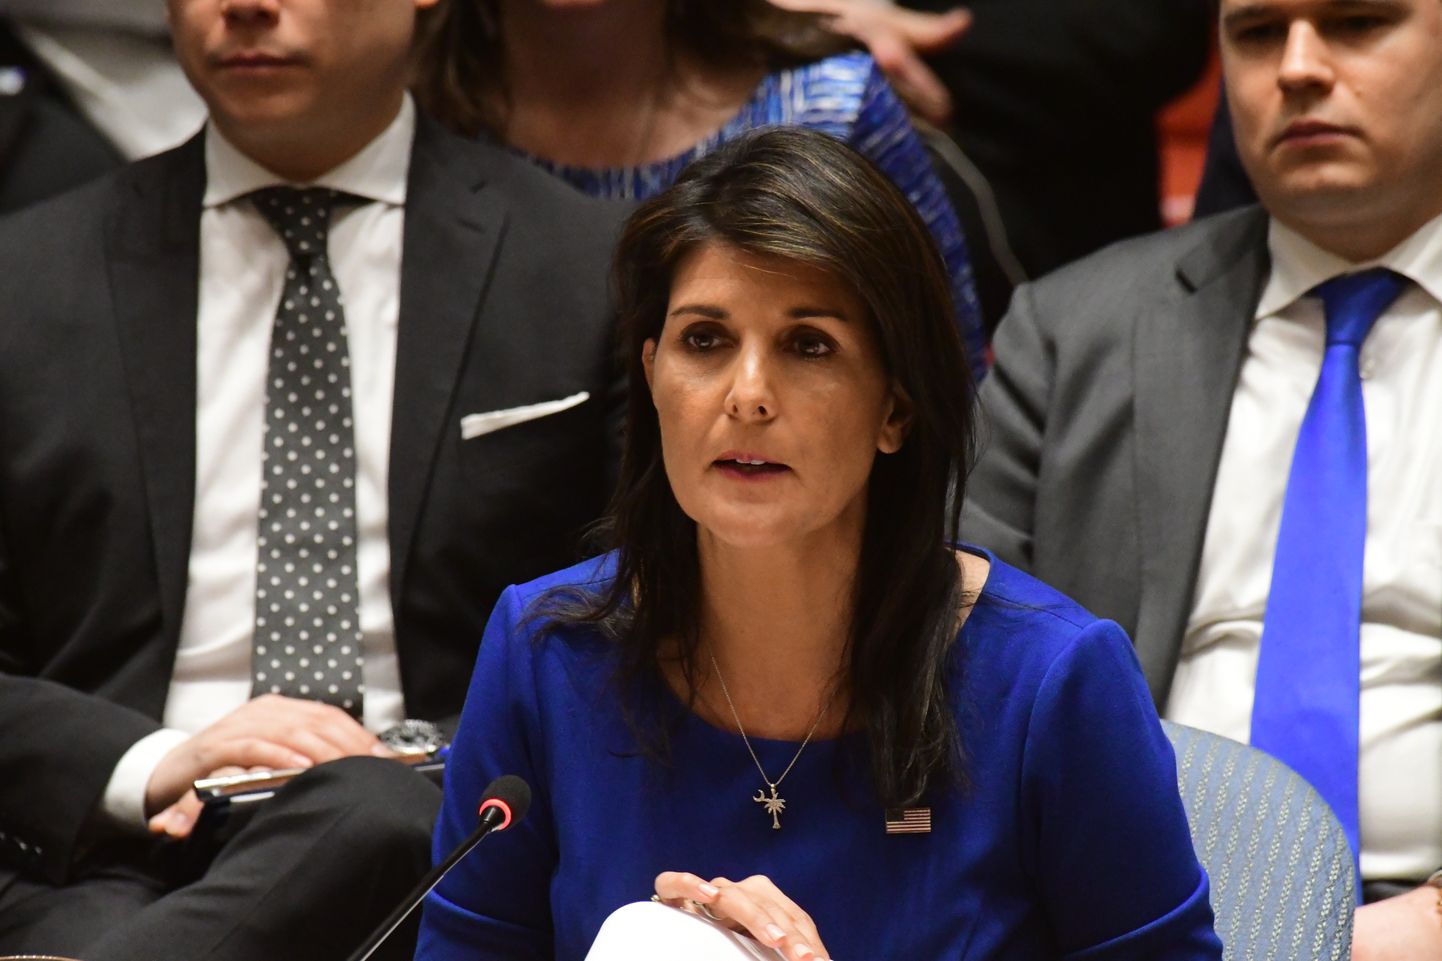 US Representative Nikki Haley. The United Nations Security Council met in New York, NY on April 14, 2018; for a special session Saturday morning to debate US & allied air attacks against alleged Syrian government chemical weapons facilities. (Photo by Andy Katz / Pacific Press/Sipa USA)